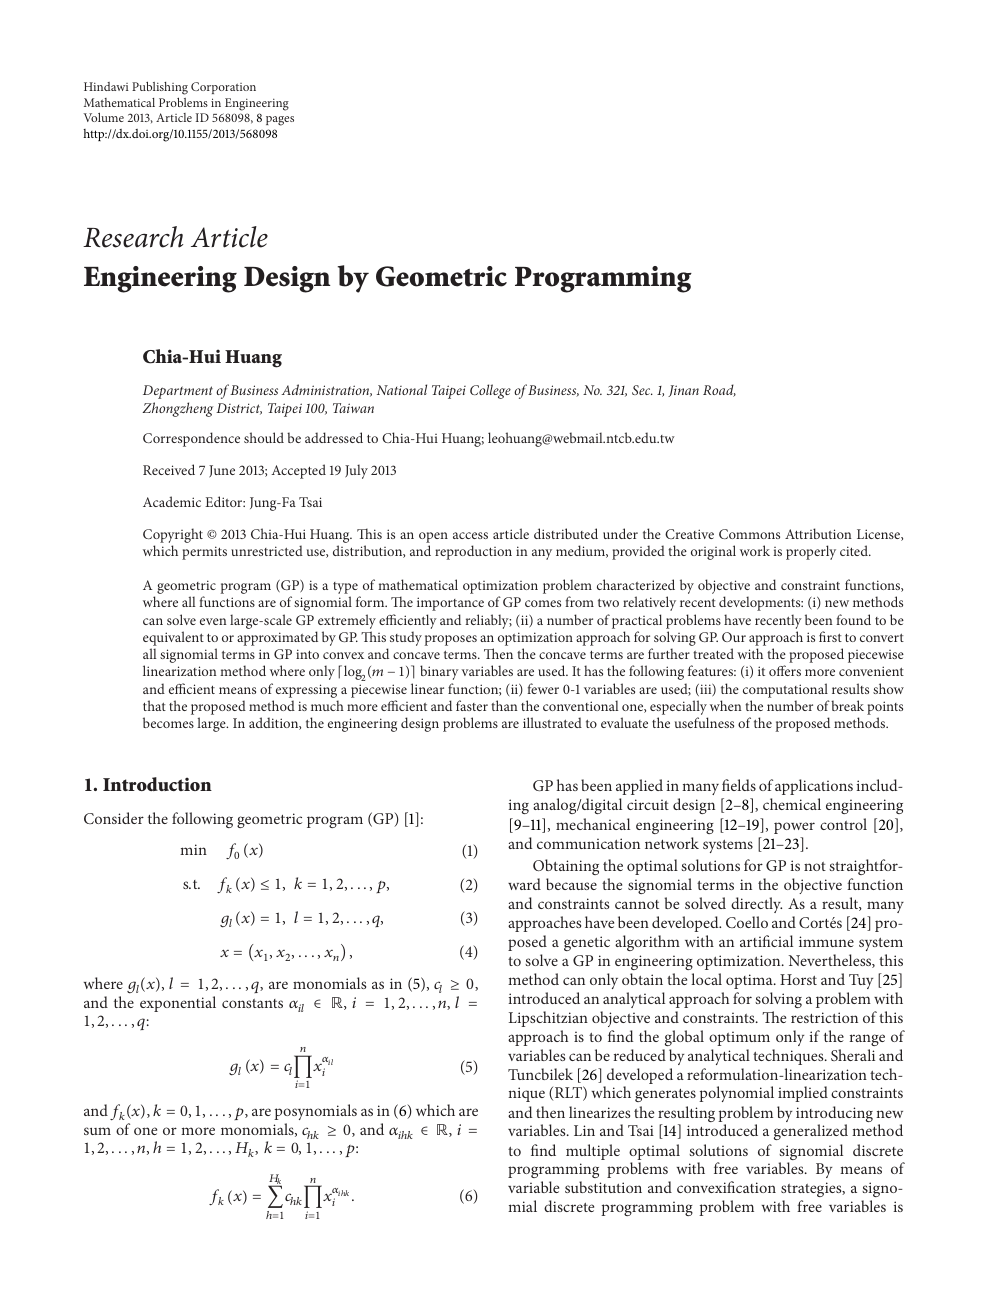 Engineering Design By Geometric Programming Topic Of Research Paper In Mathematics Download Scholarly Article Pdf And Read For Free On Cyberleninka Open Science Hub